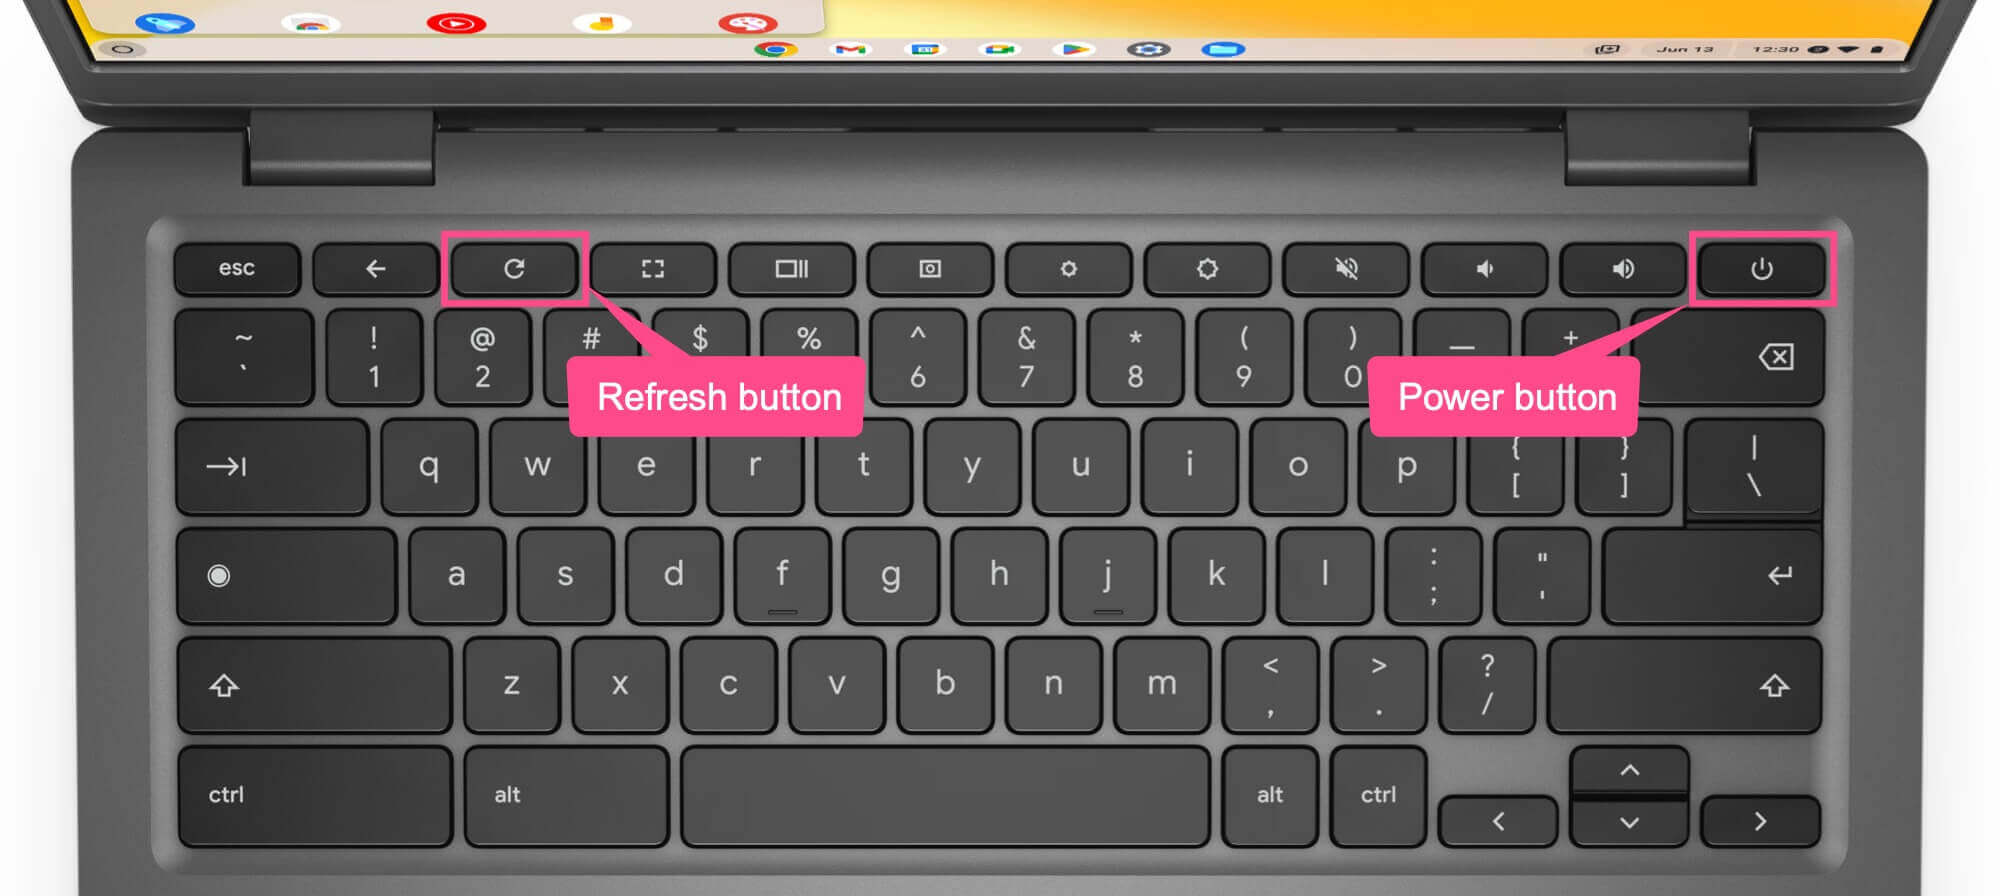 how to restart a chromebook with keyboard